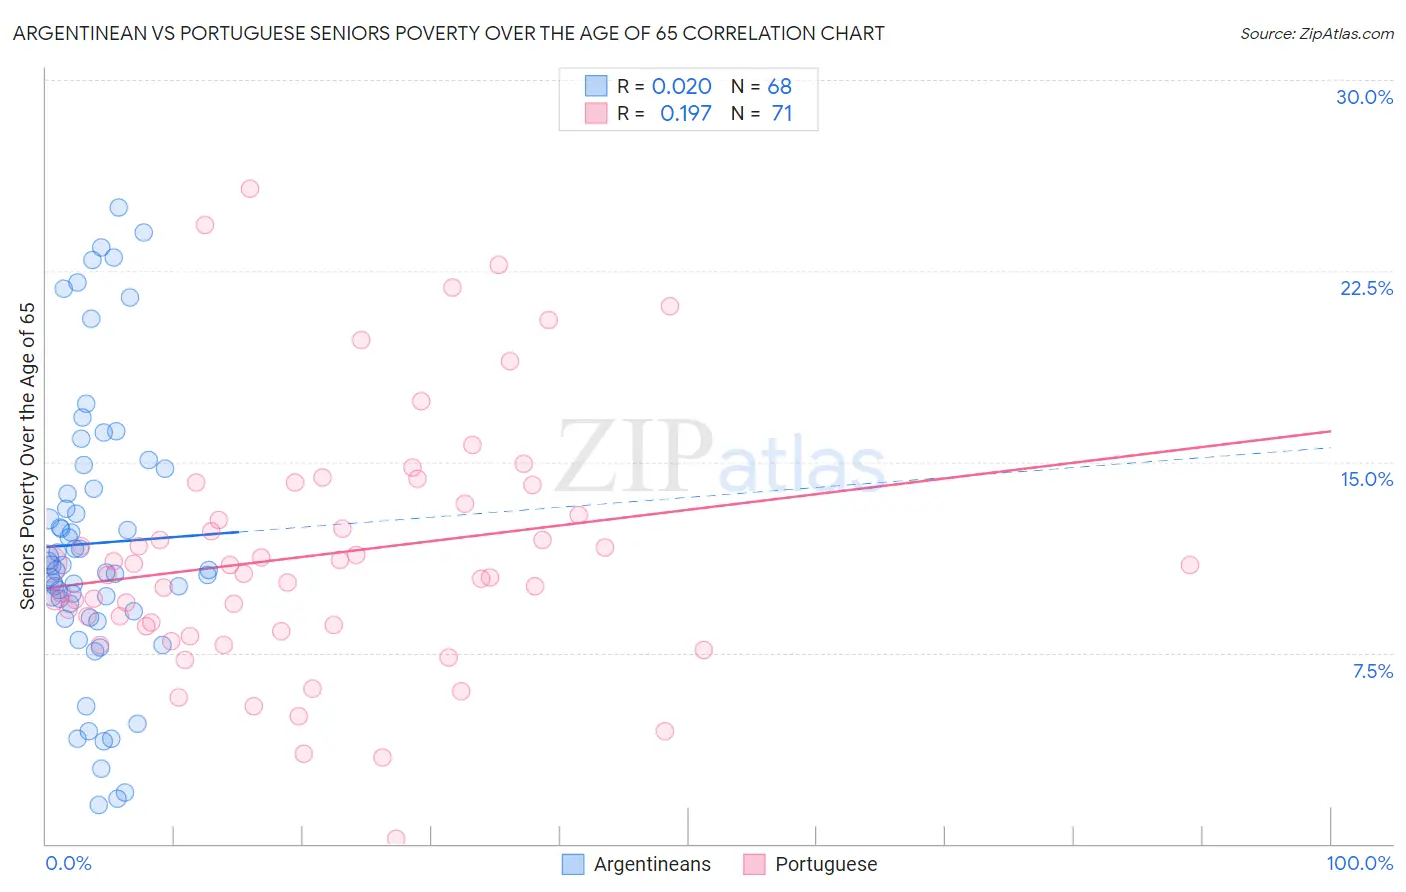 Argentinean vs Portuguese Seniors Poverty Over the Age of 65